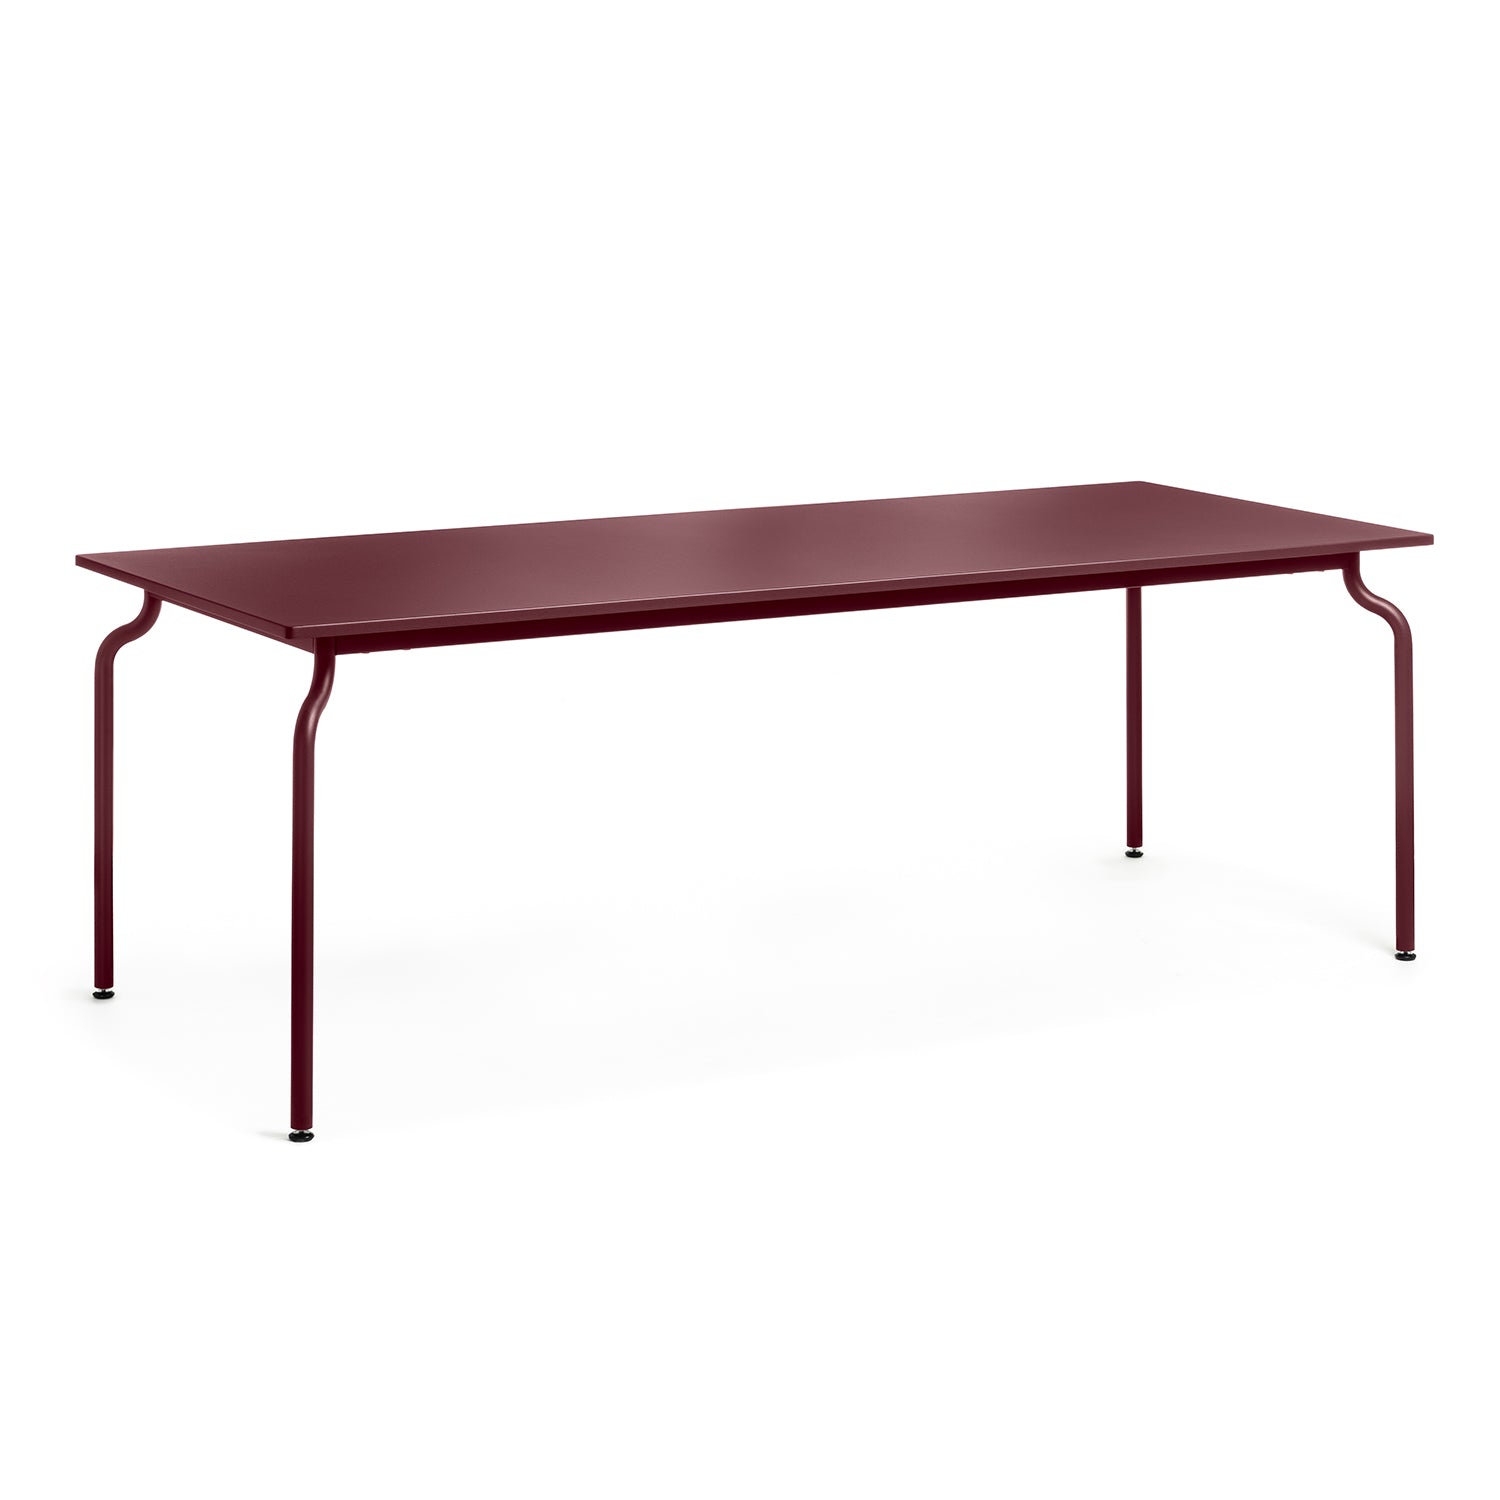 South Dining Table in bordeaux 200x90cm